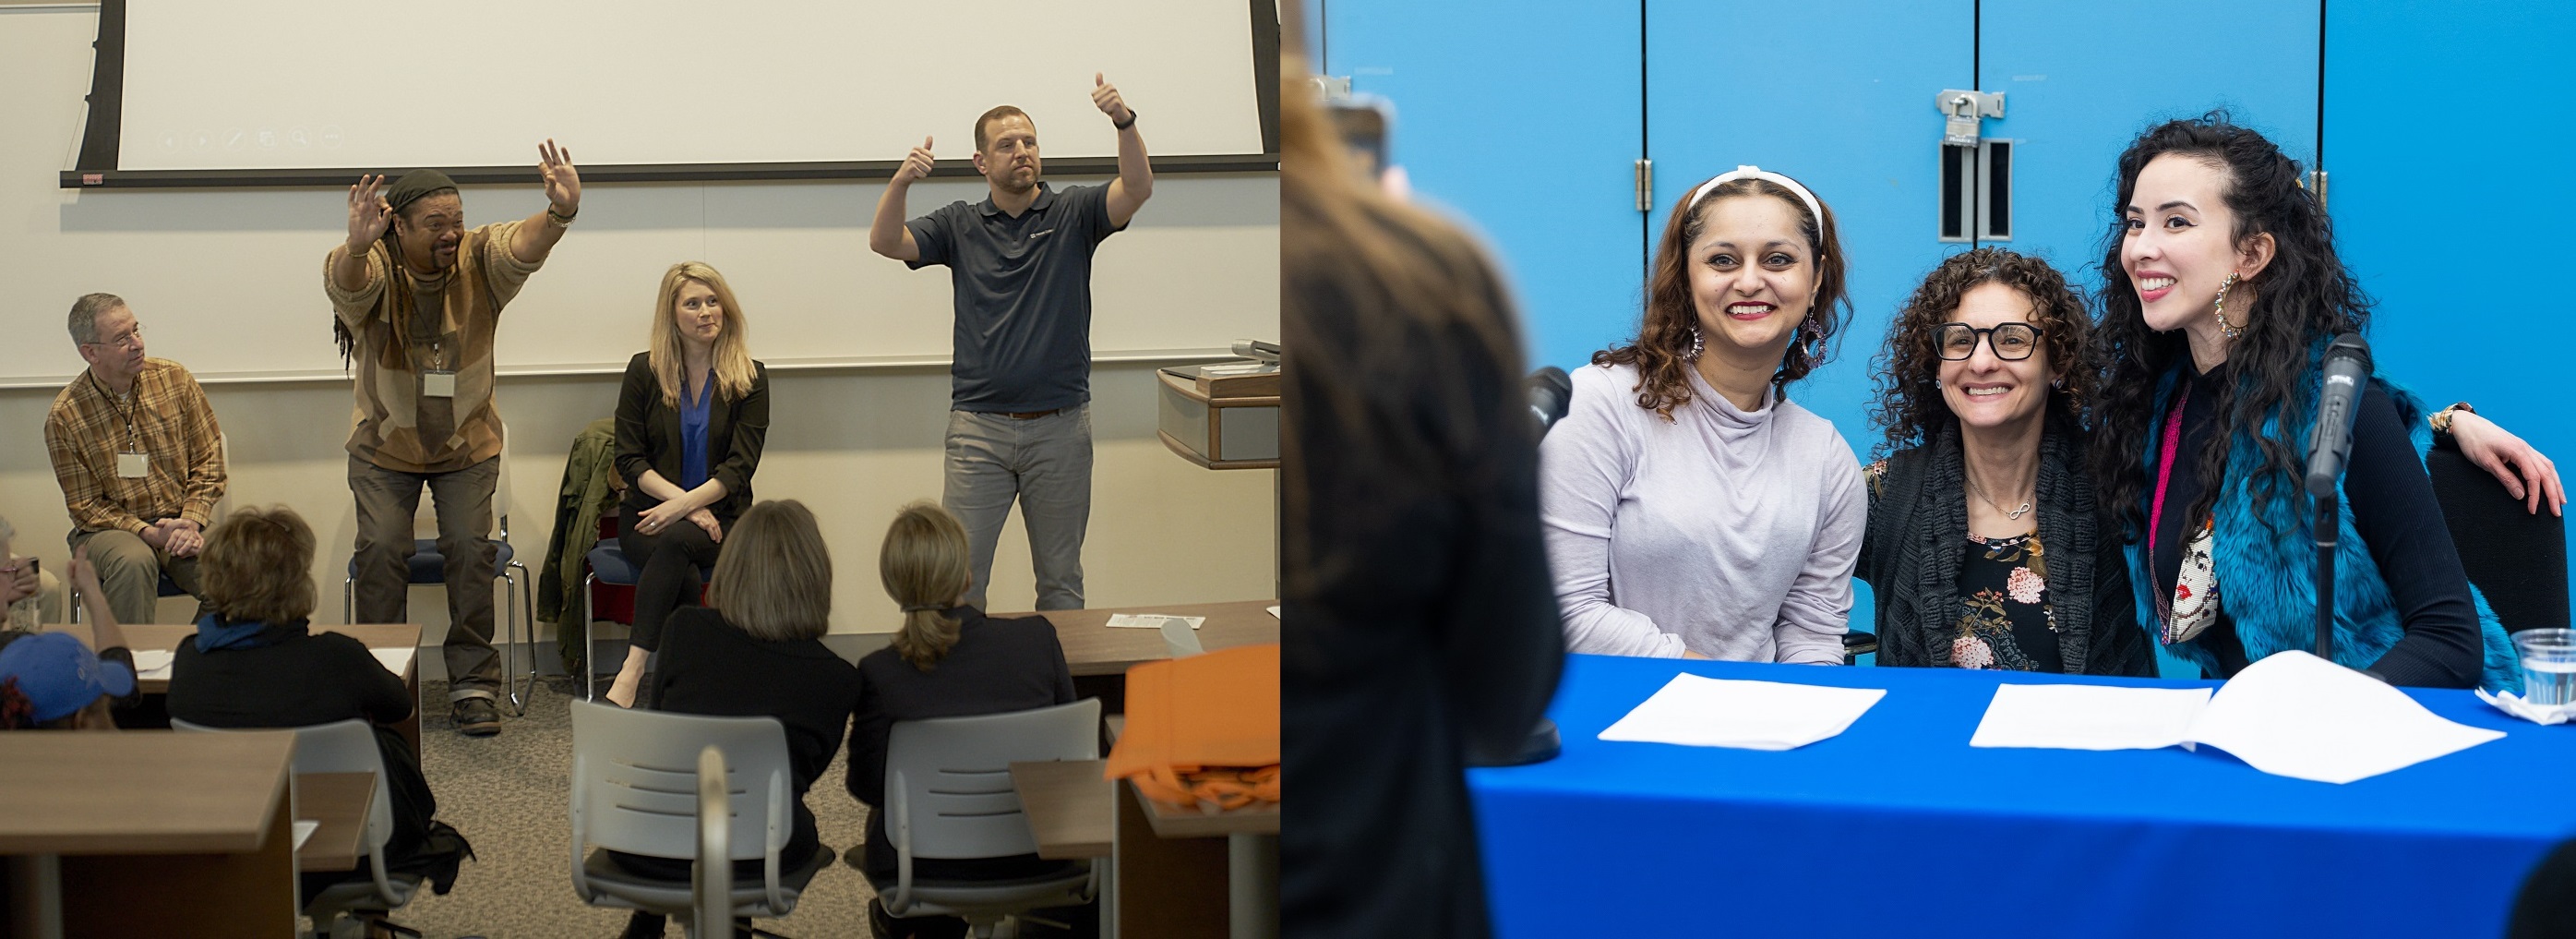 These two images show the 2019 STEAM Science Fair for the Hearing Impaired and 2023 Disability Awareness Month events.